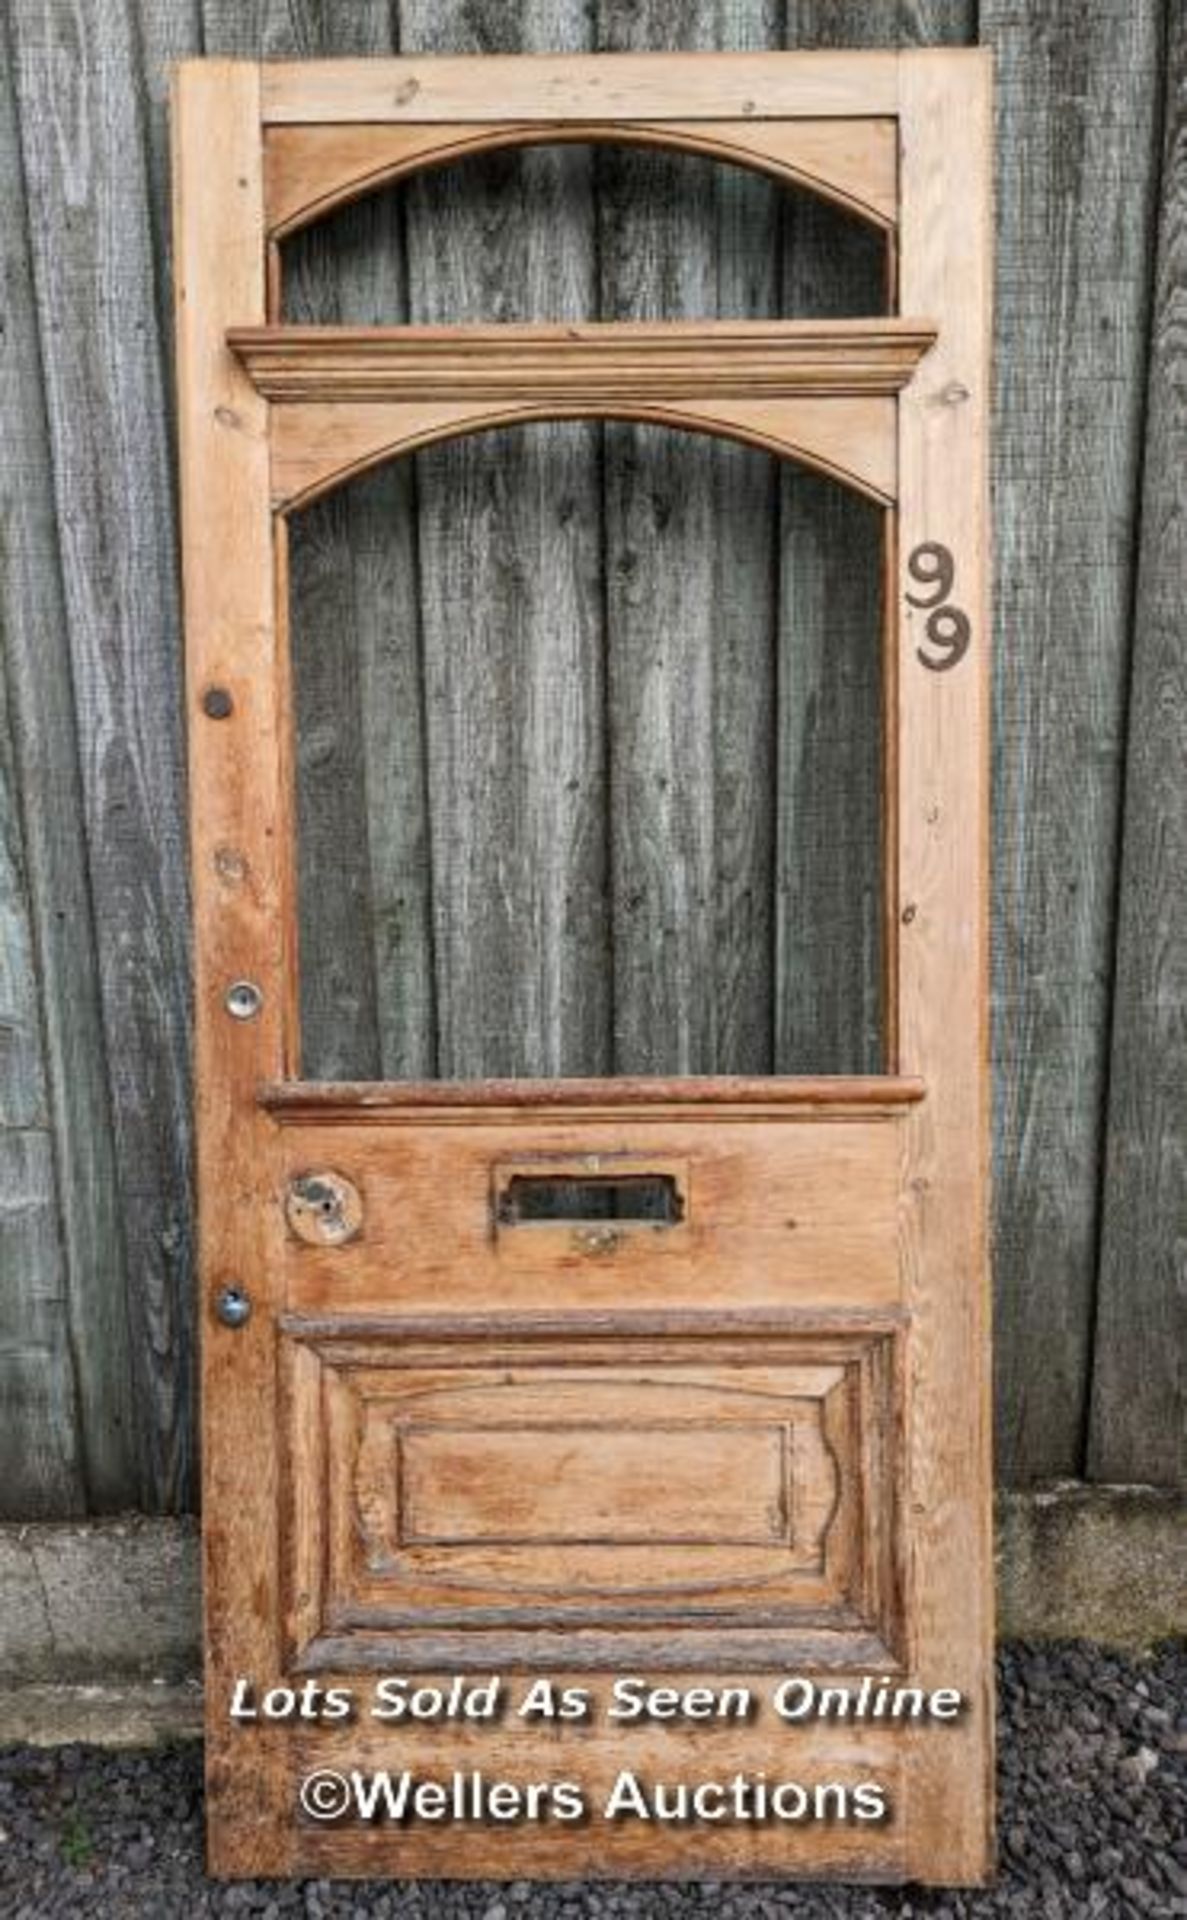 Good quality late Victorian pine front door for restoration and glazing. 96cm W x 218cm H x 4.7cm